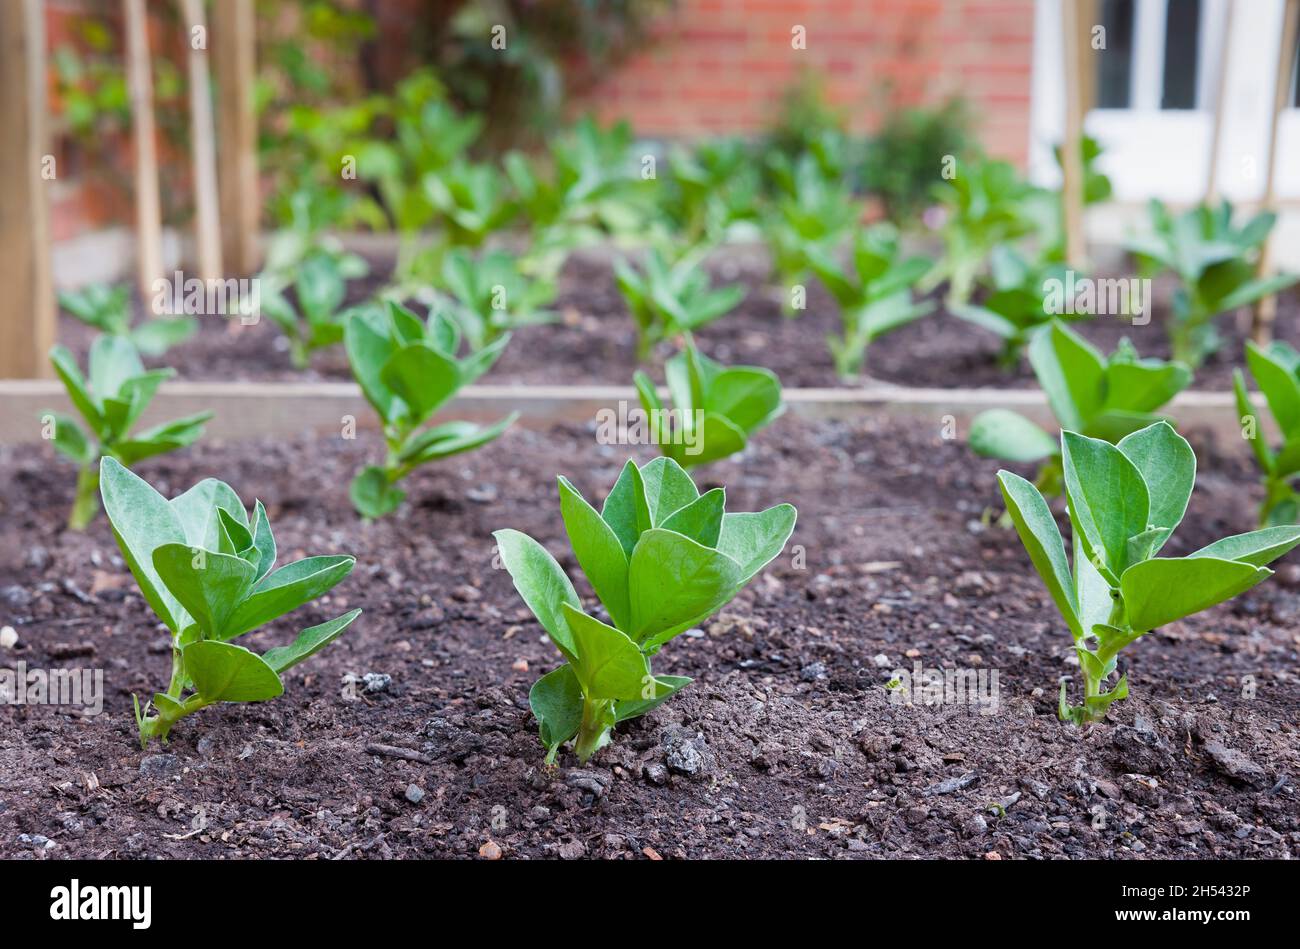 Broad bean plants, young fava bean seedlings growing outside in a UK garden Stock Photo